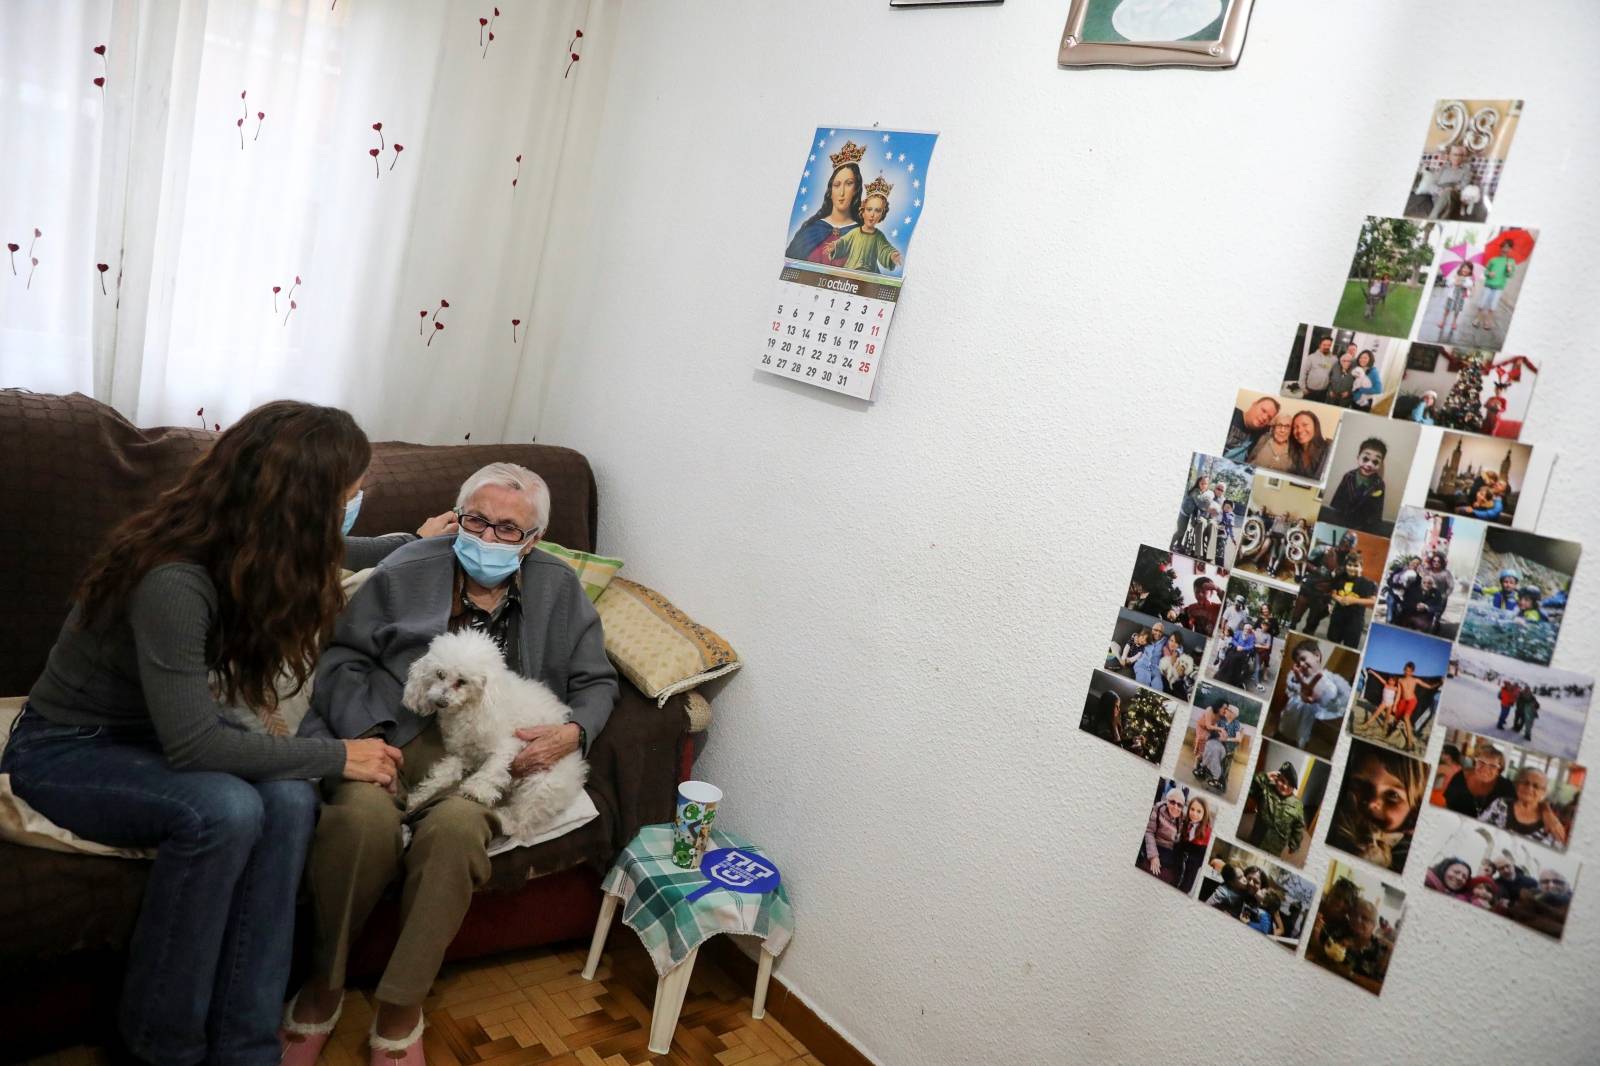 Florentina Martin, a 99 year-old woman who survived coronavirus disease (COVID-19), sits with her granddaughter Noelia Valle in her home in Pinto